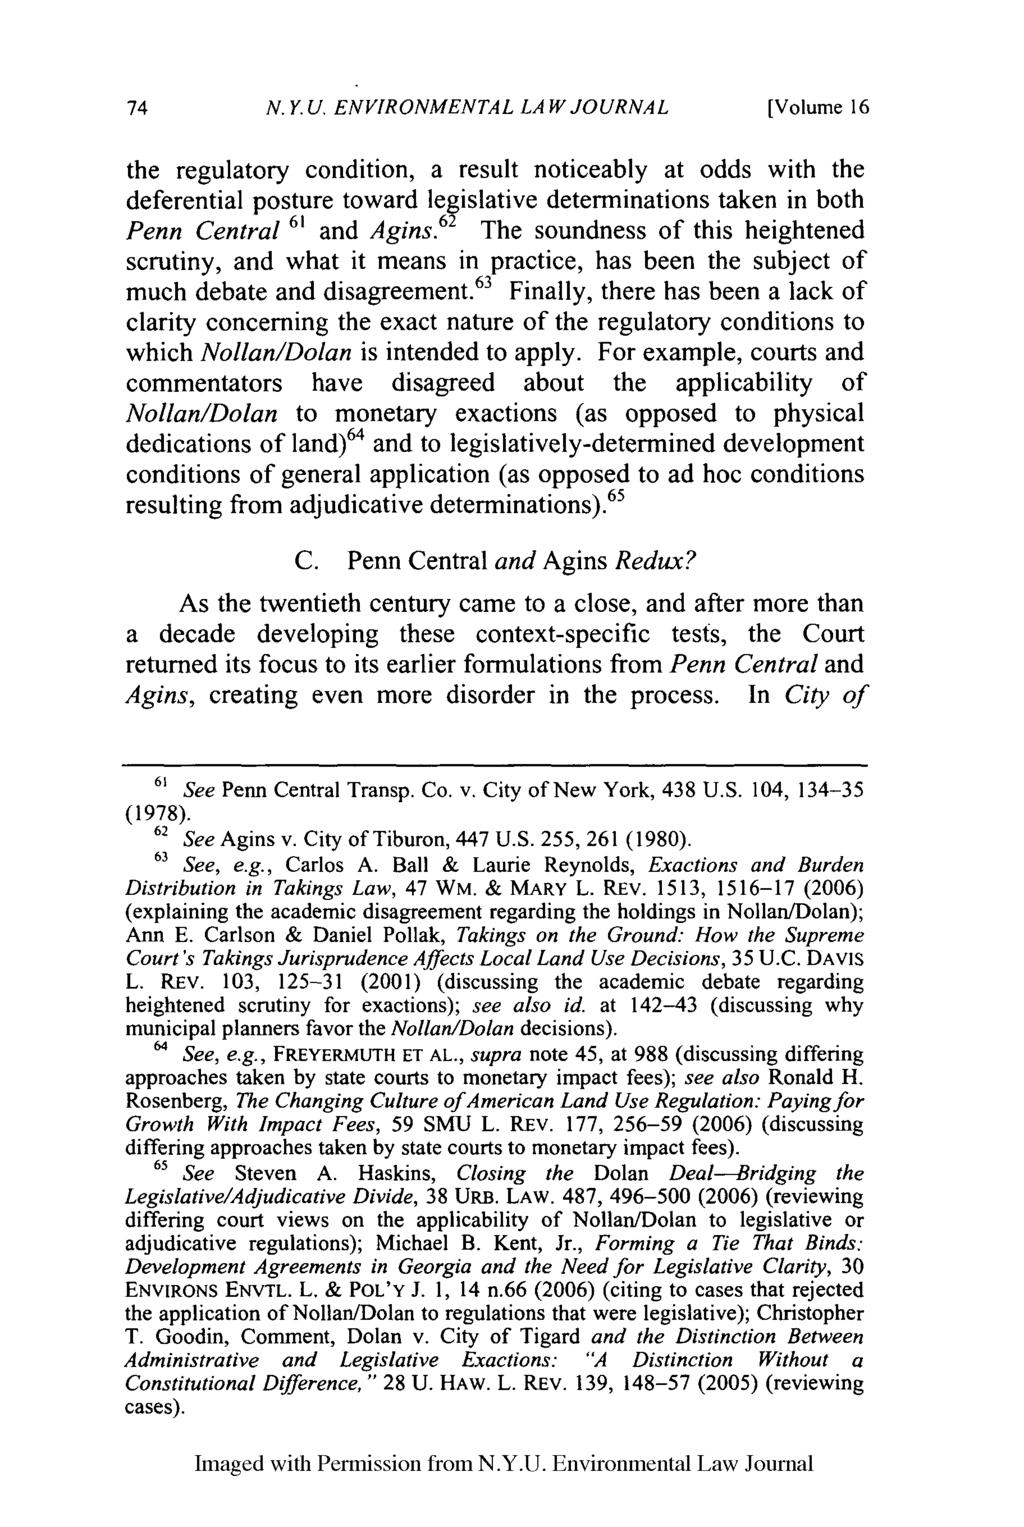 N.Y. U, ENVIRONMENTAL LAWJOURNAL [Volume 16 the regulatory condition, a result noticeably at odds with the deferential posture toward legislative determinations taken in both Penn Central 61 and